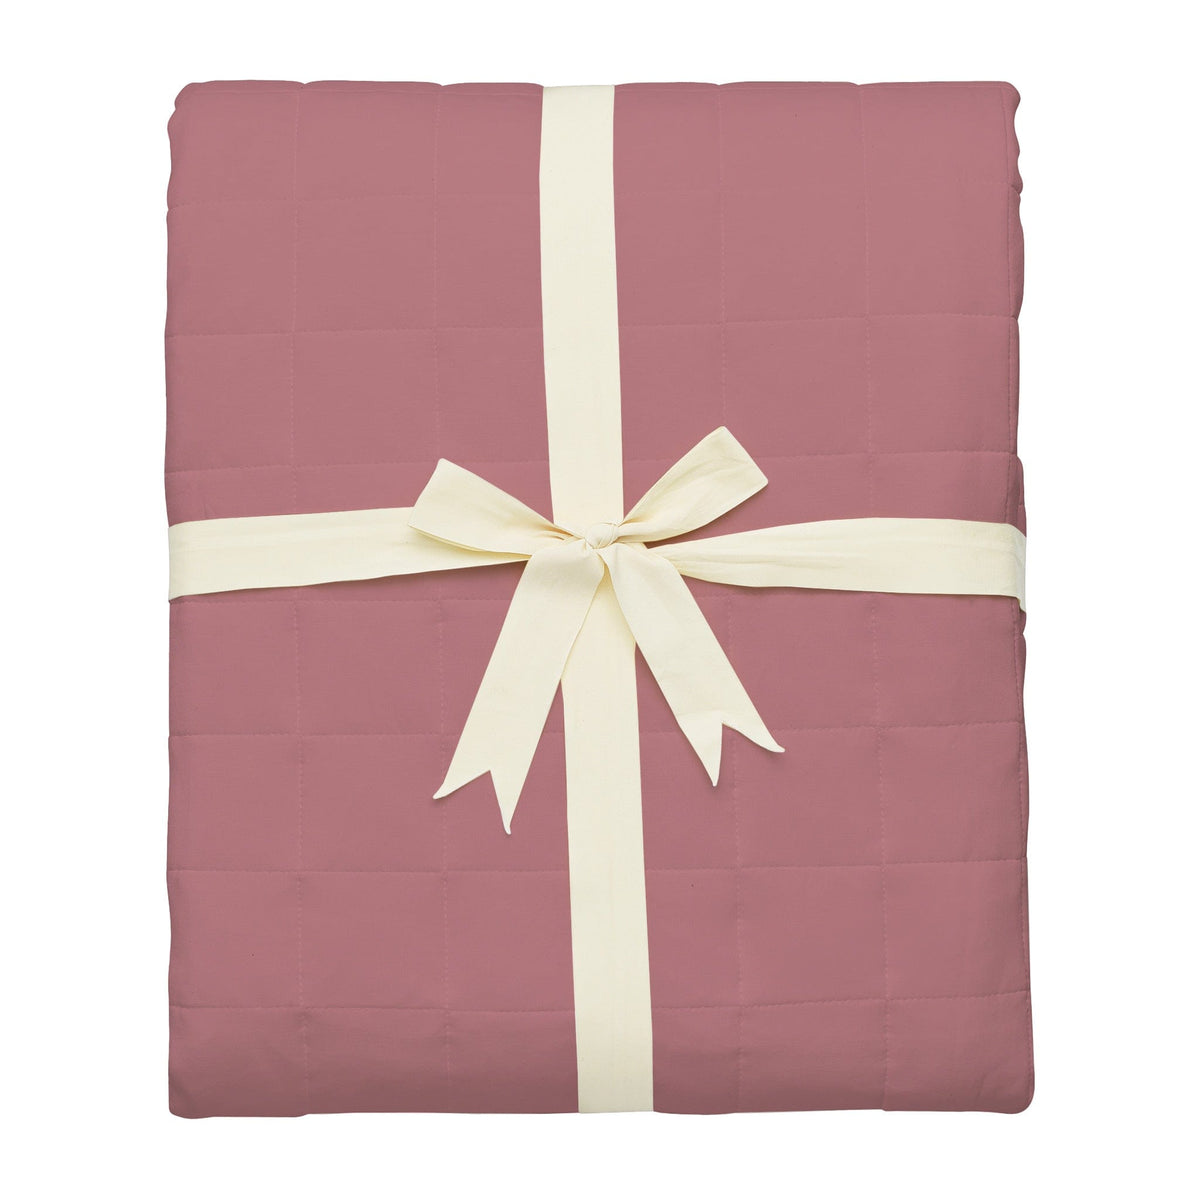 Kyte Baby Adult Blanket Dusty Rose / Adult Adult Quilted Blanket in Dusty Rose 2.5